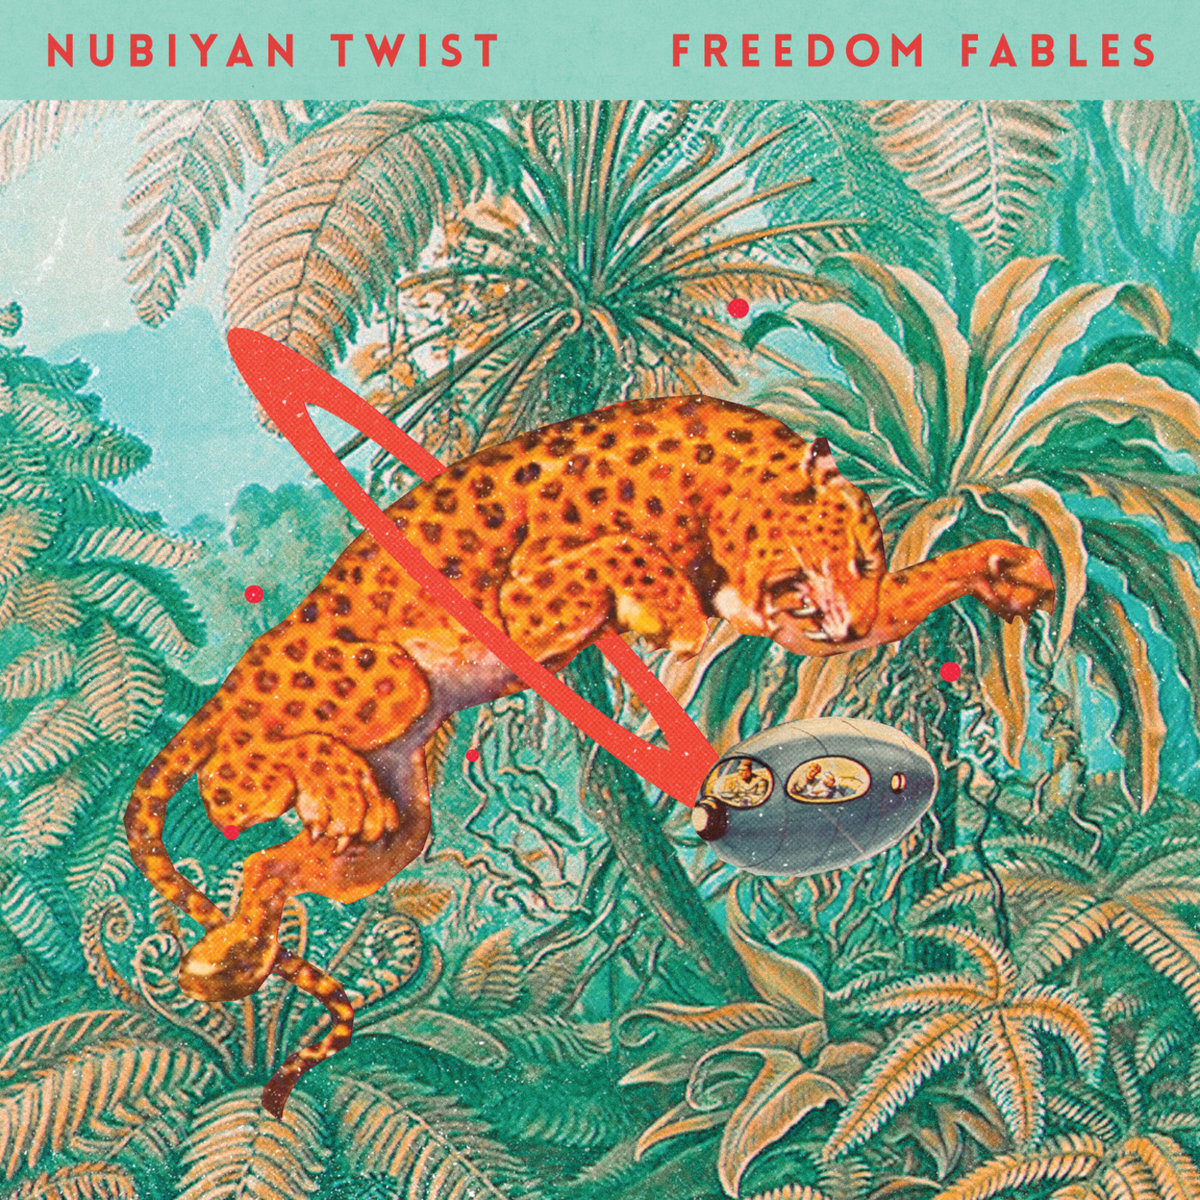 RECORD OF THE WEEK//Nubiyan Twist – Freedom Fables